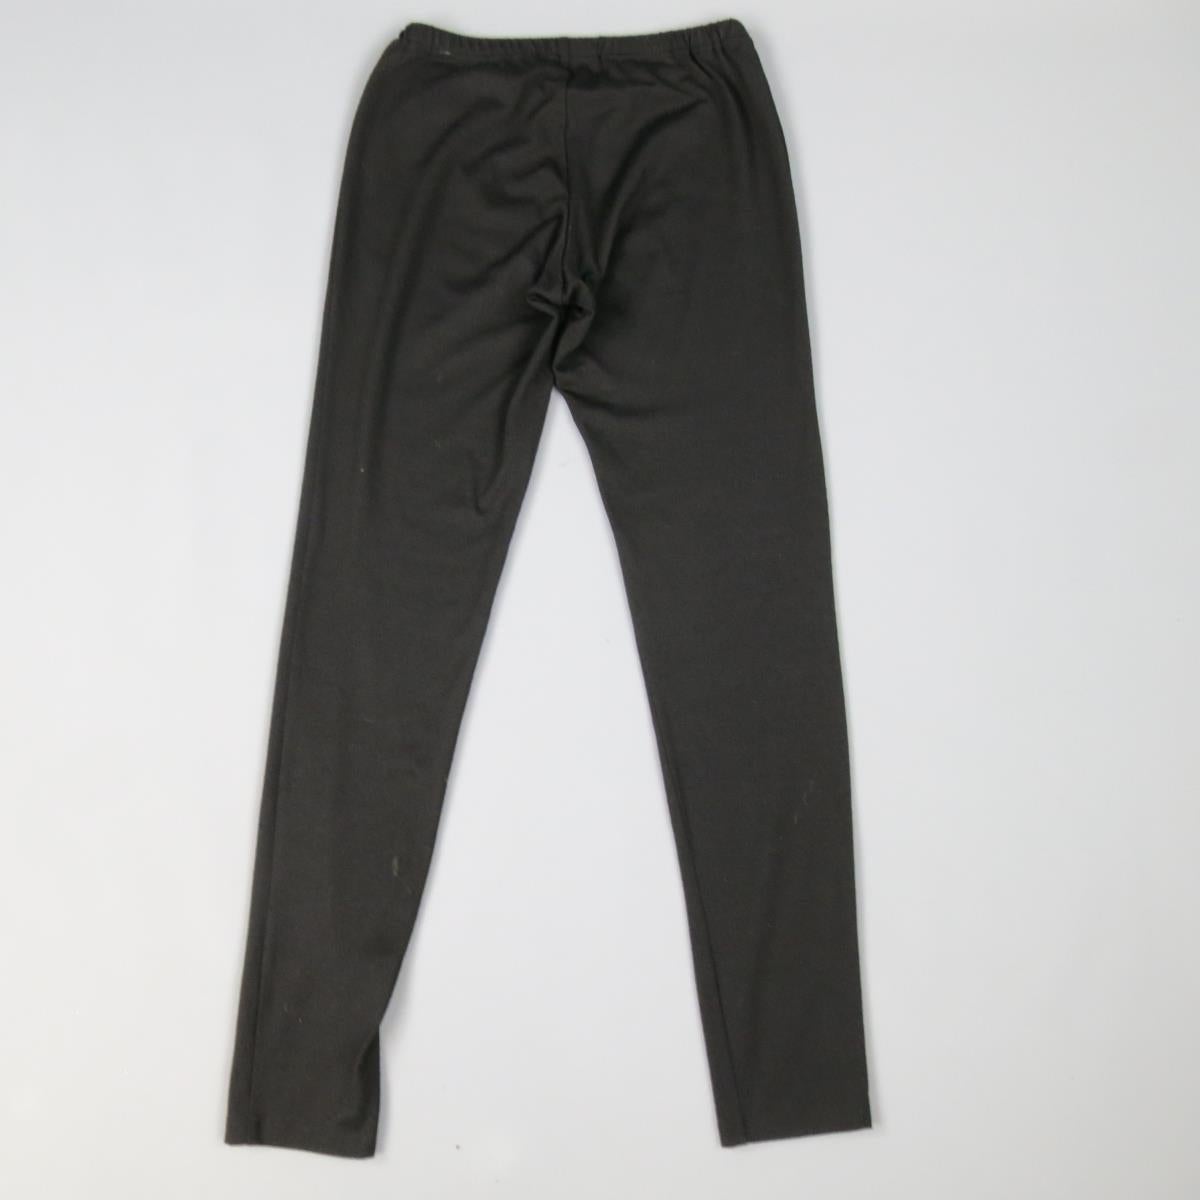 YOHJI YAMAMOTO black wool/polyester blend leggings feature an elastic waistband and stretch throughout. Made in Japan. 
Good Pre-Owned Condition. 
 

Measurements: 
  
l	Waist: 26 In.
l	Rise: 9 In.
l	Length: 37.5 In.

  
  
  
 
Reference: